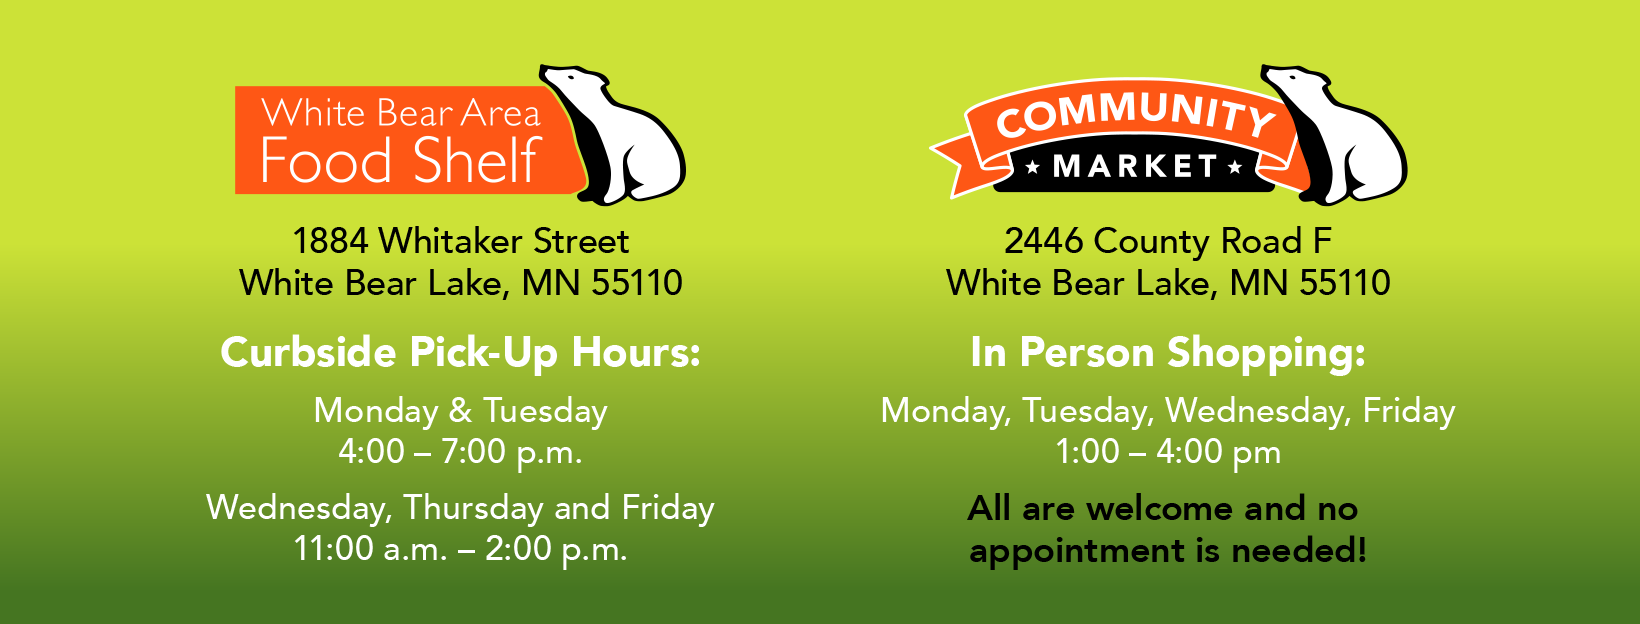 White Bear Area Food Shelf, 1884 Whitaker Street, White Bear Lake, MN 55110, Curbside Pick-up hours, M-T 4:00-7:00pm, W-Th-F 11:00am-2:00pm. Community Market, 2446 County Road F, White Bear Lake, MN 55110, In Person Shopping, M-T-W-F 11:00am-4:00pm. All are welcome and no appointment is needed!